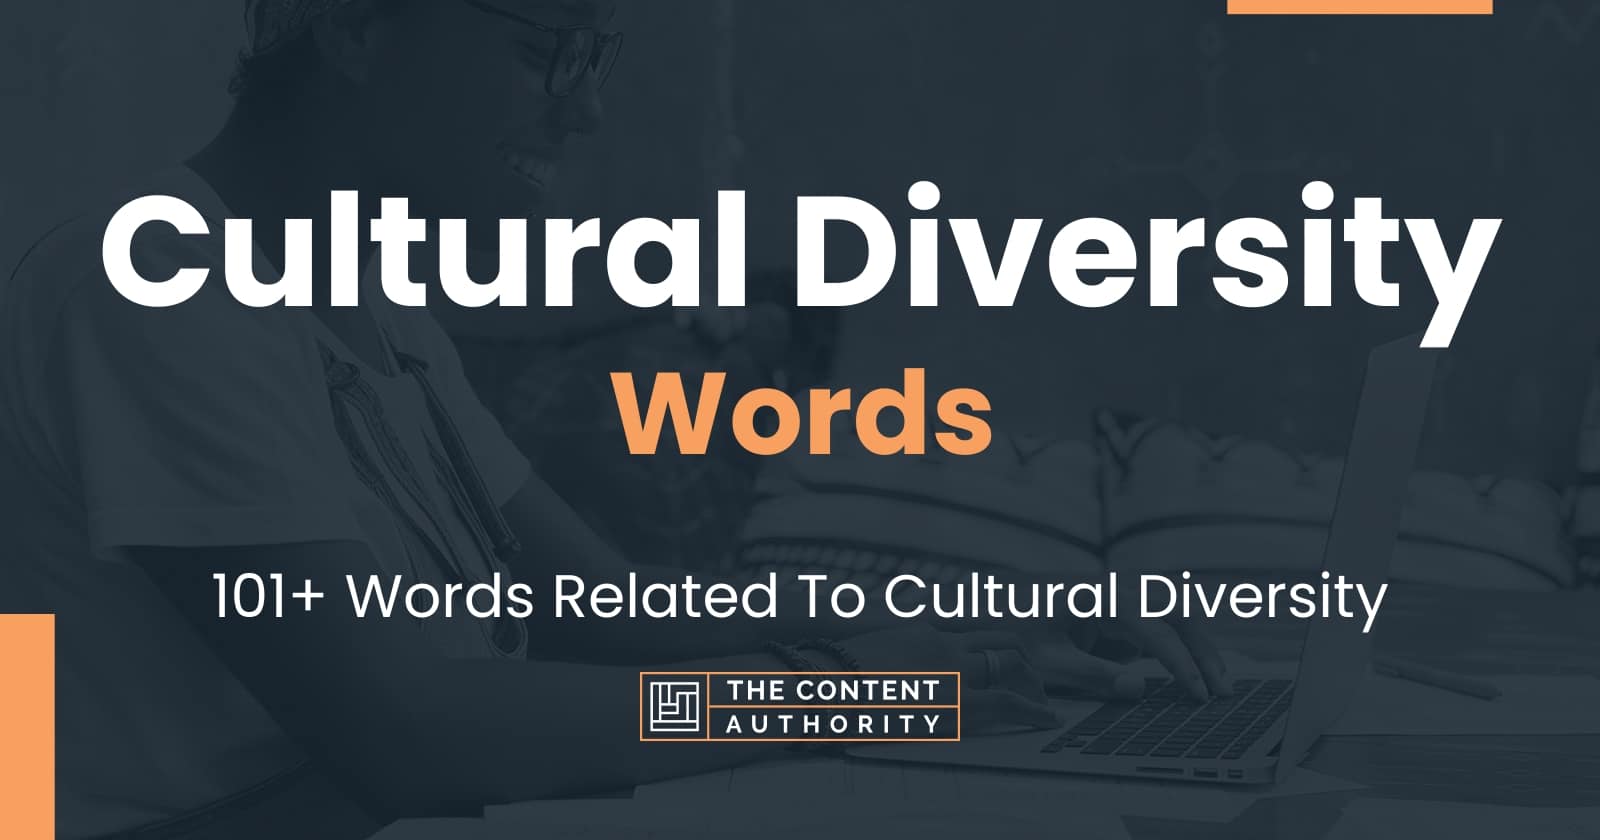 Cultural Diversity Words - 101+ Words Related To Cultural Diversity